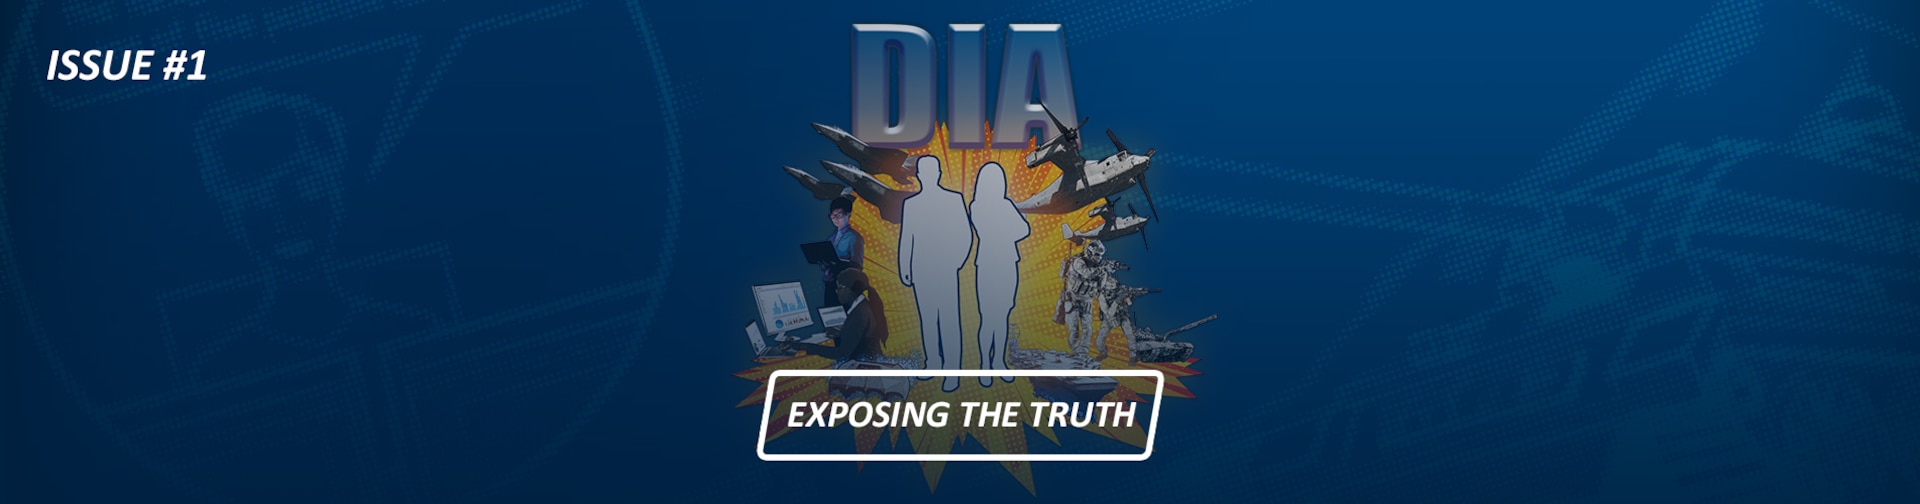 The cover of the first issue of. "Exposing the Truth,". which includes a silhouette of a man and woman surrounded by military vehicles, soldiers and analysts